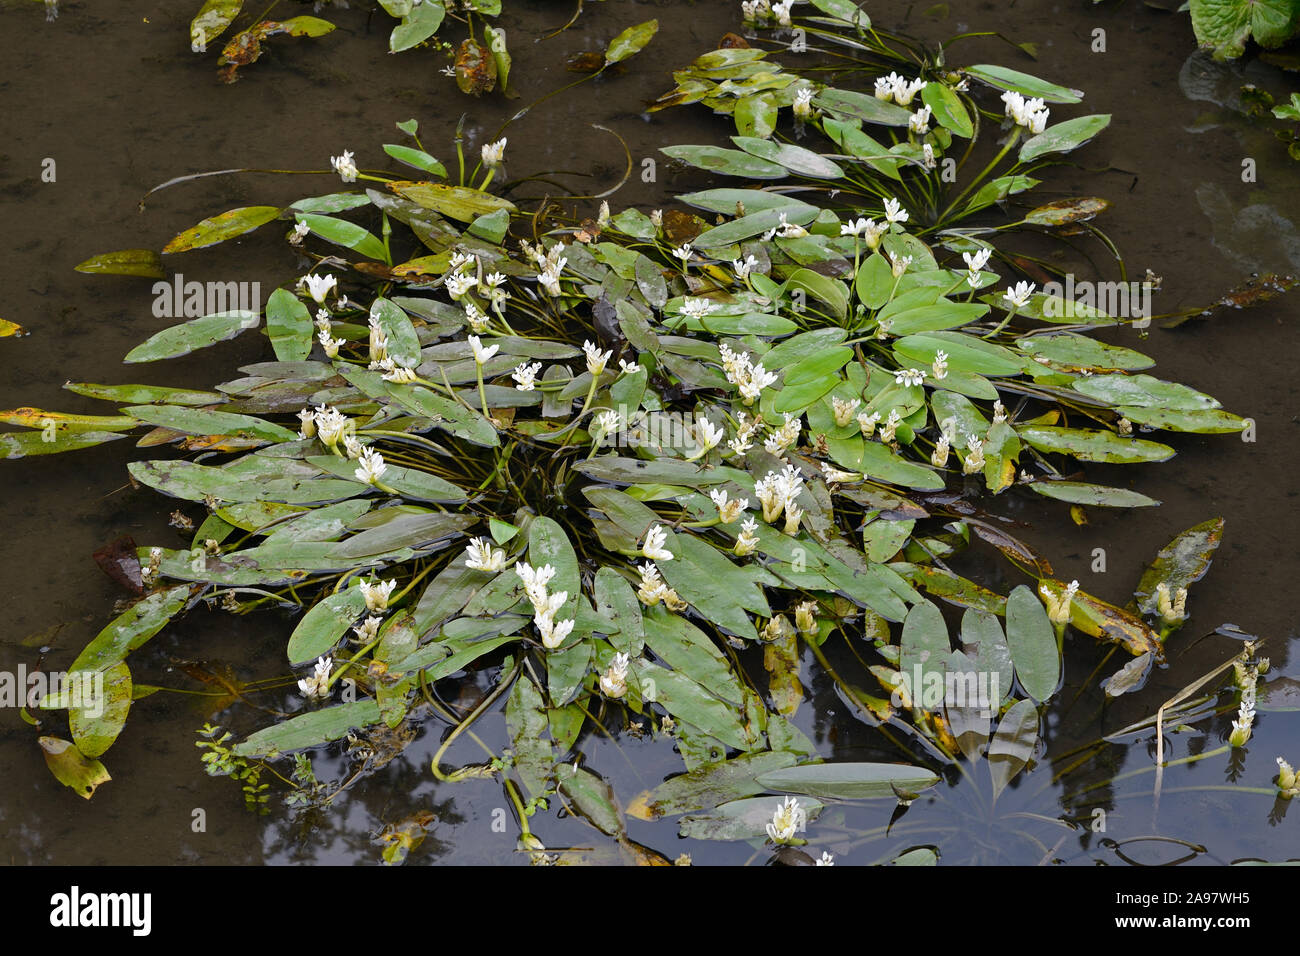 Aponogeton distachyos (Cape pondweed) is an aquatic flowering plant native to South Africa's Western Cape and Mpumalanga provinces. Stock Photo